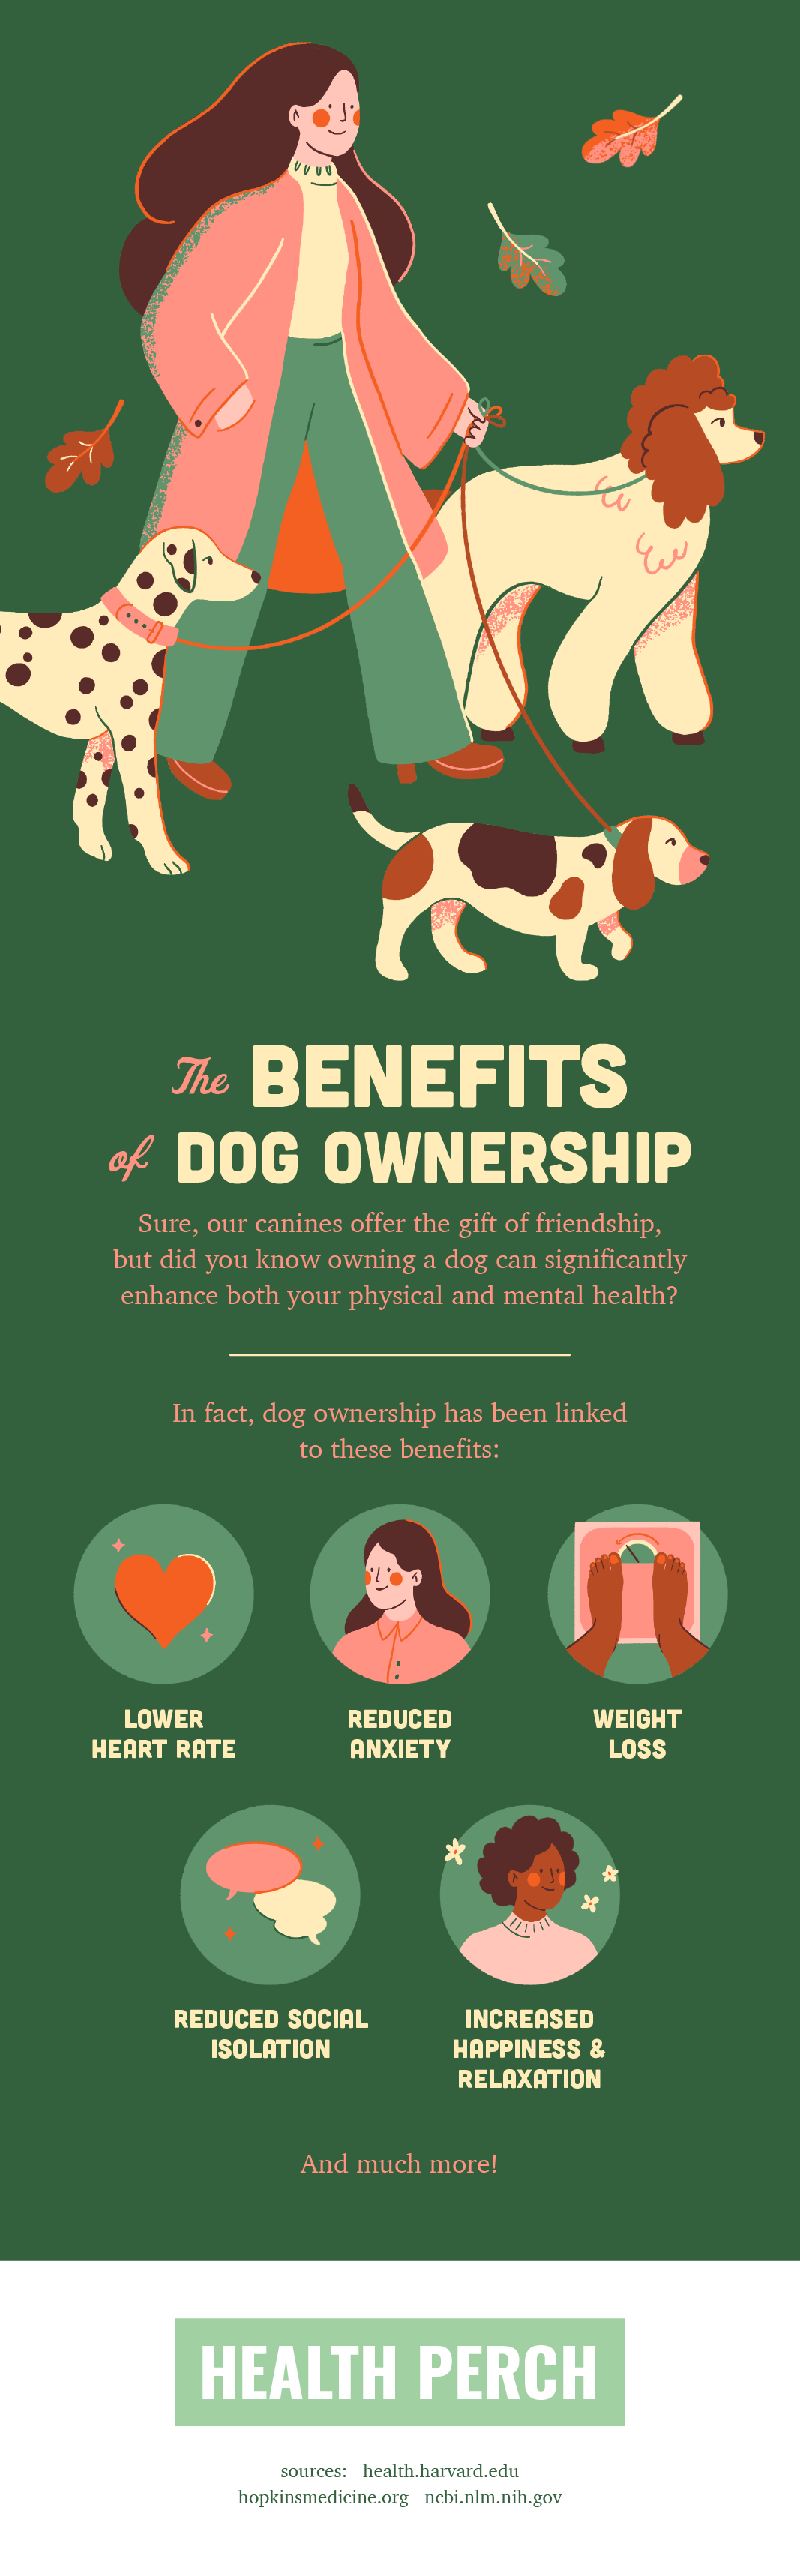 How Your Dog Can Improve Your Health